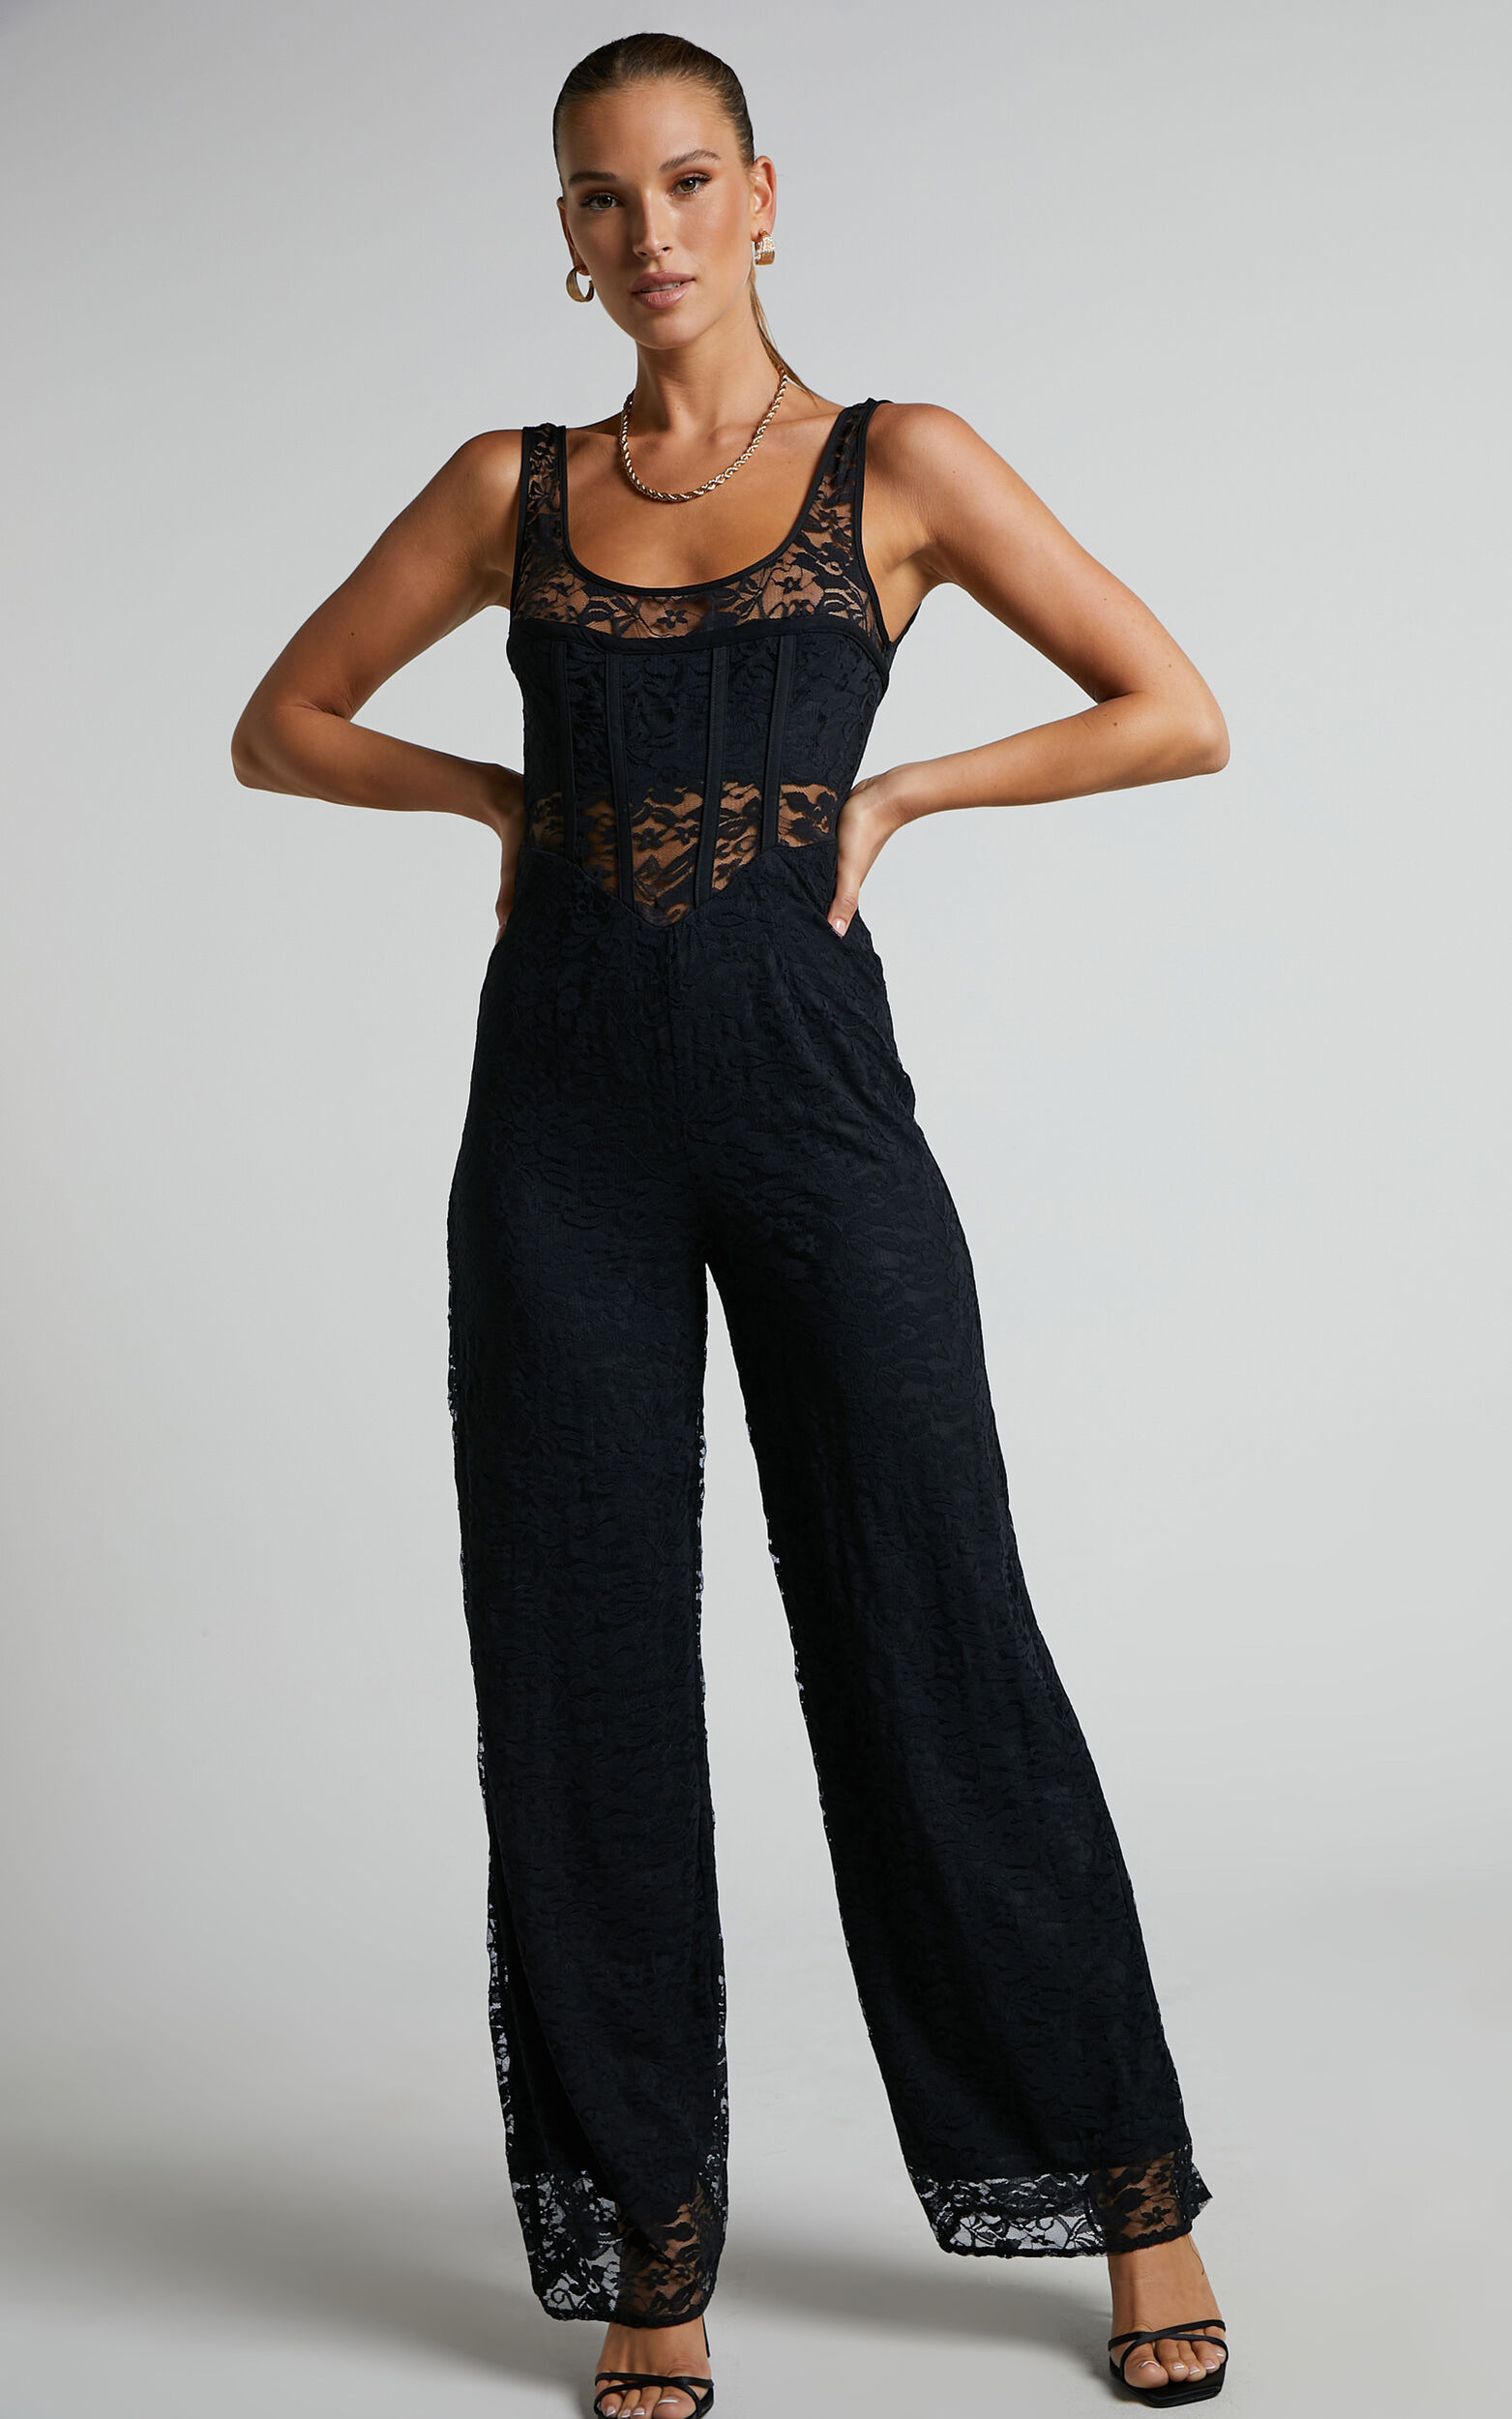 RUNAWAY THE LABEL - MAE LACE JUMPSUIT in Black | Showpo USA